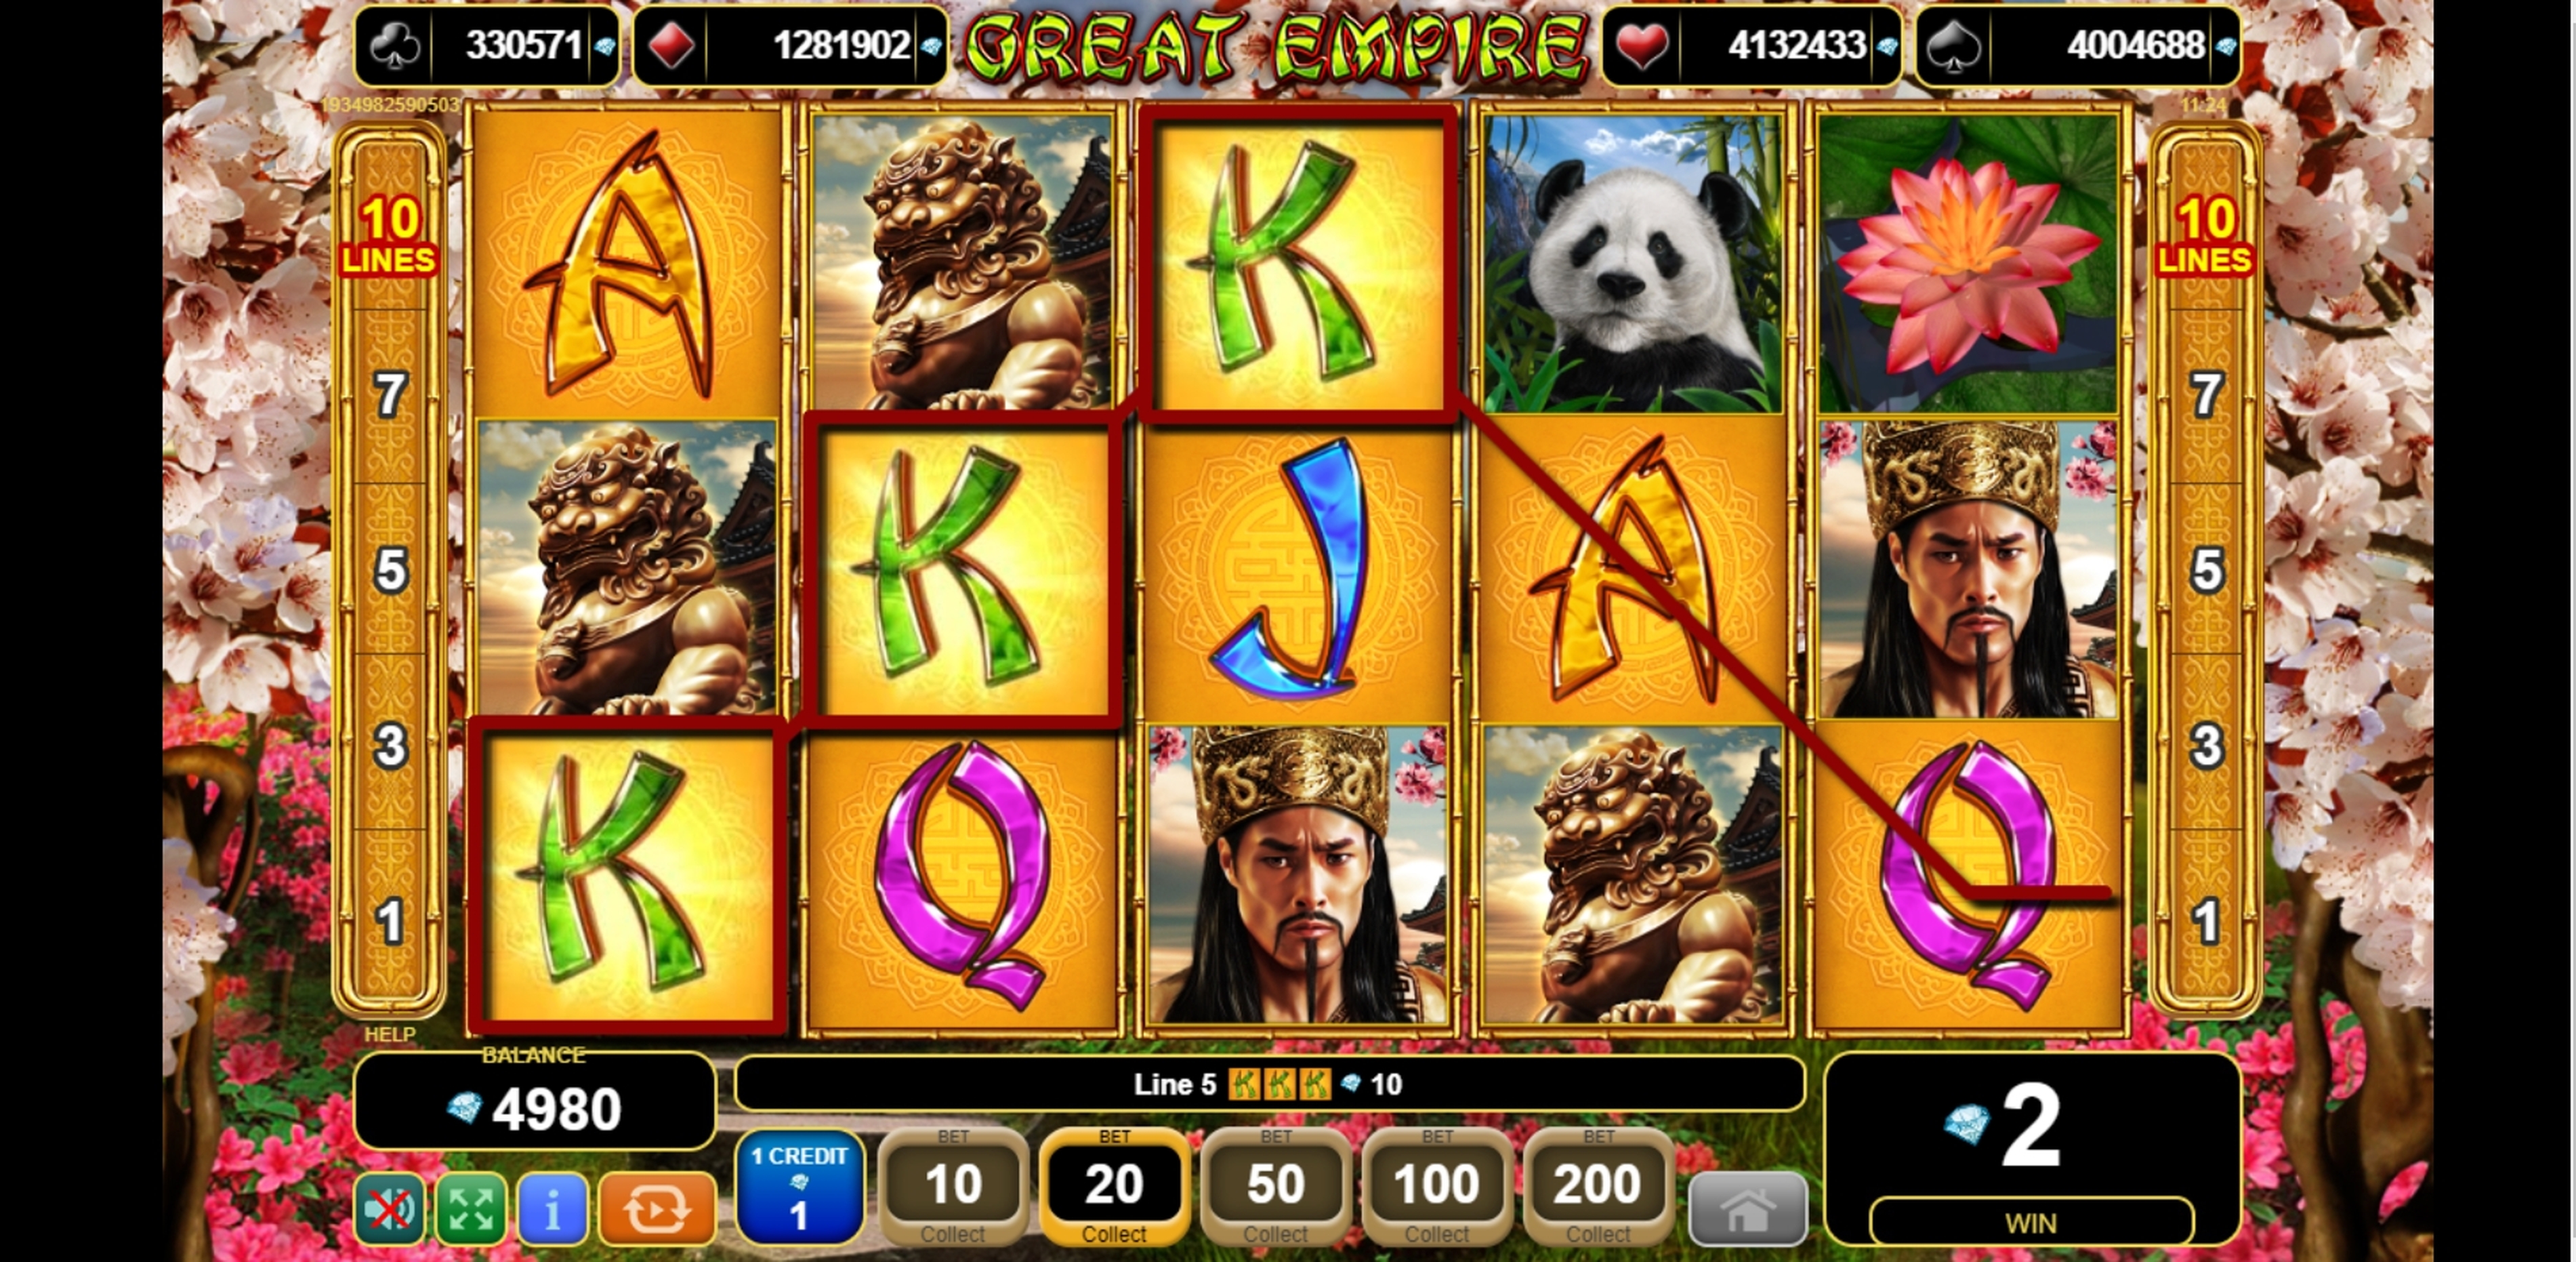 Win Money in Great Empire Free Slot Game by EGT